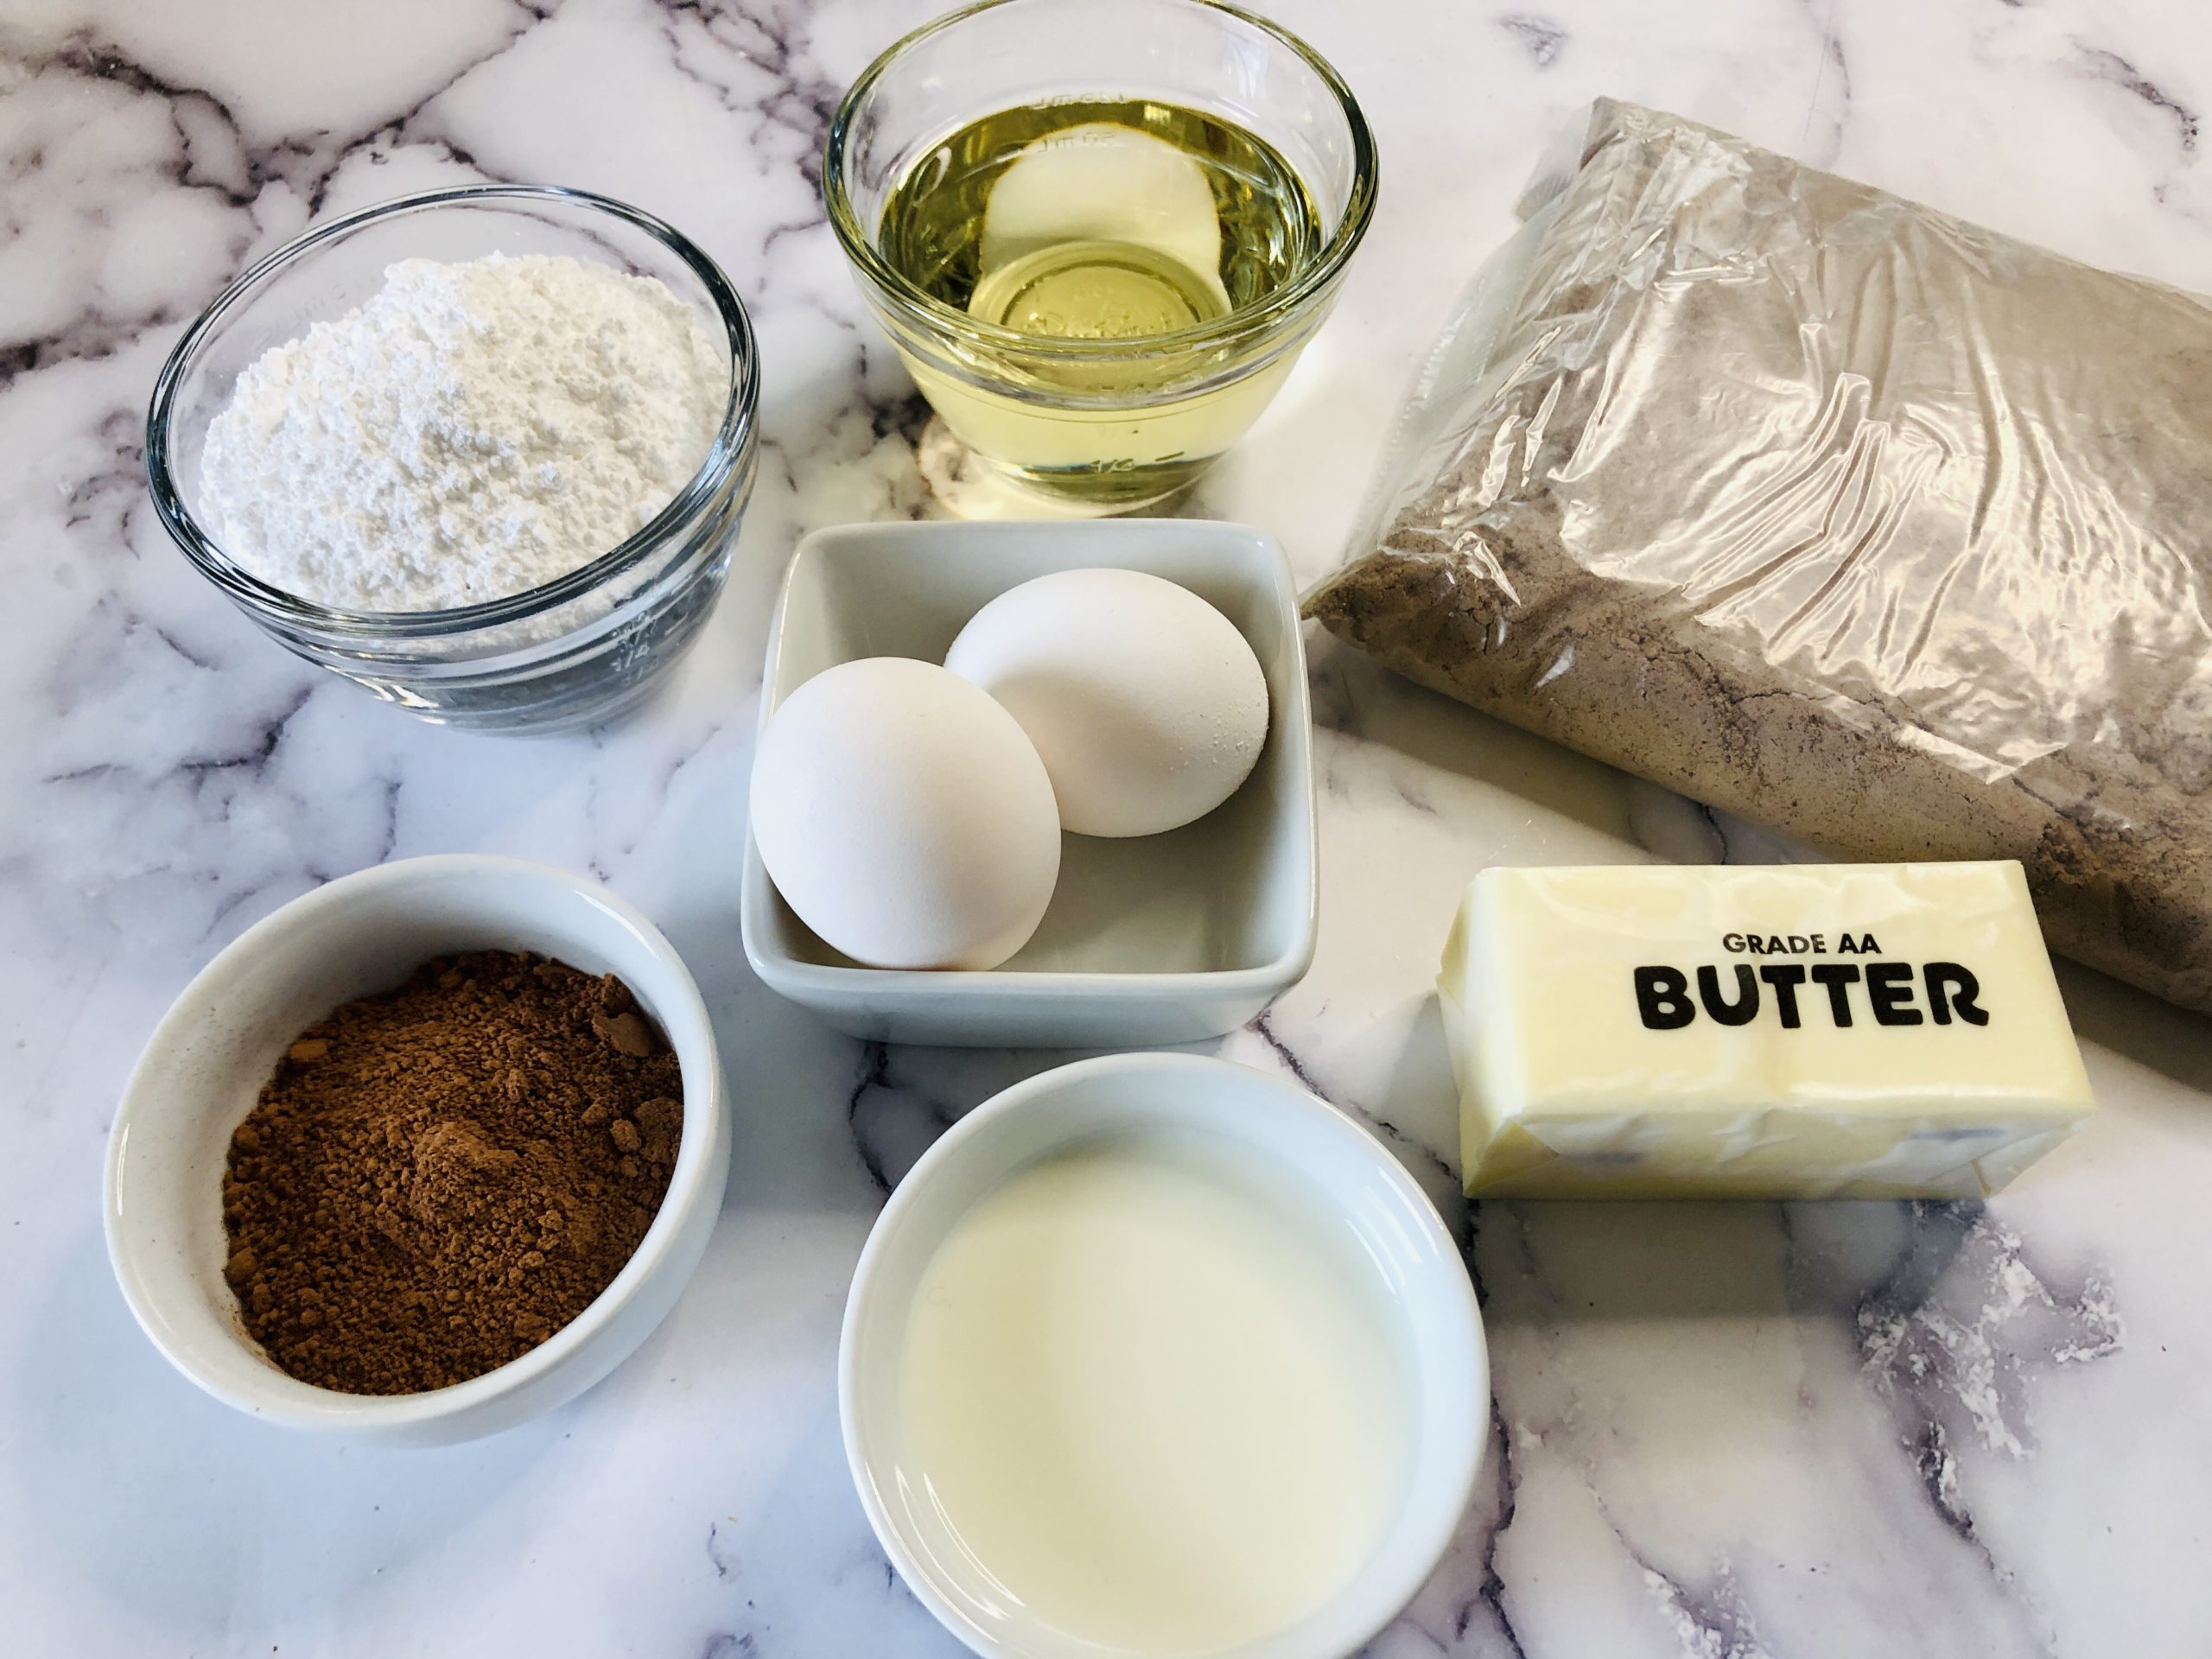 Cake mix, butter, chocolate and eggs to make the cake.